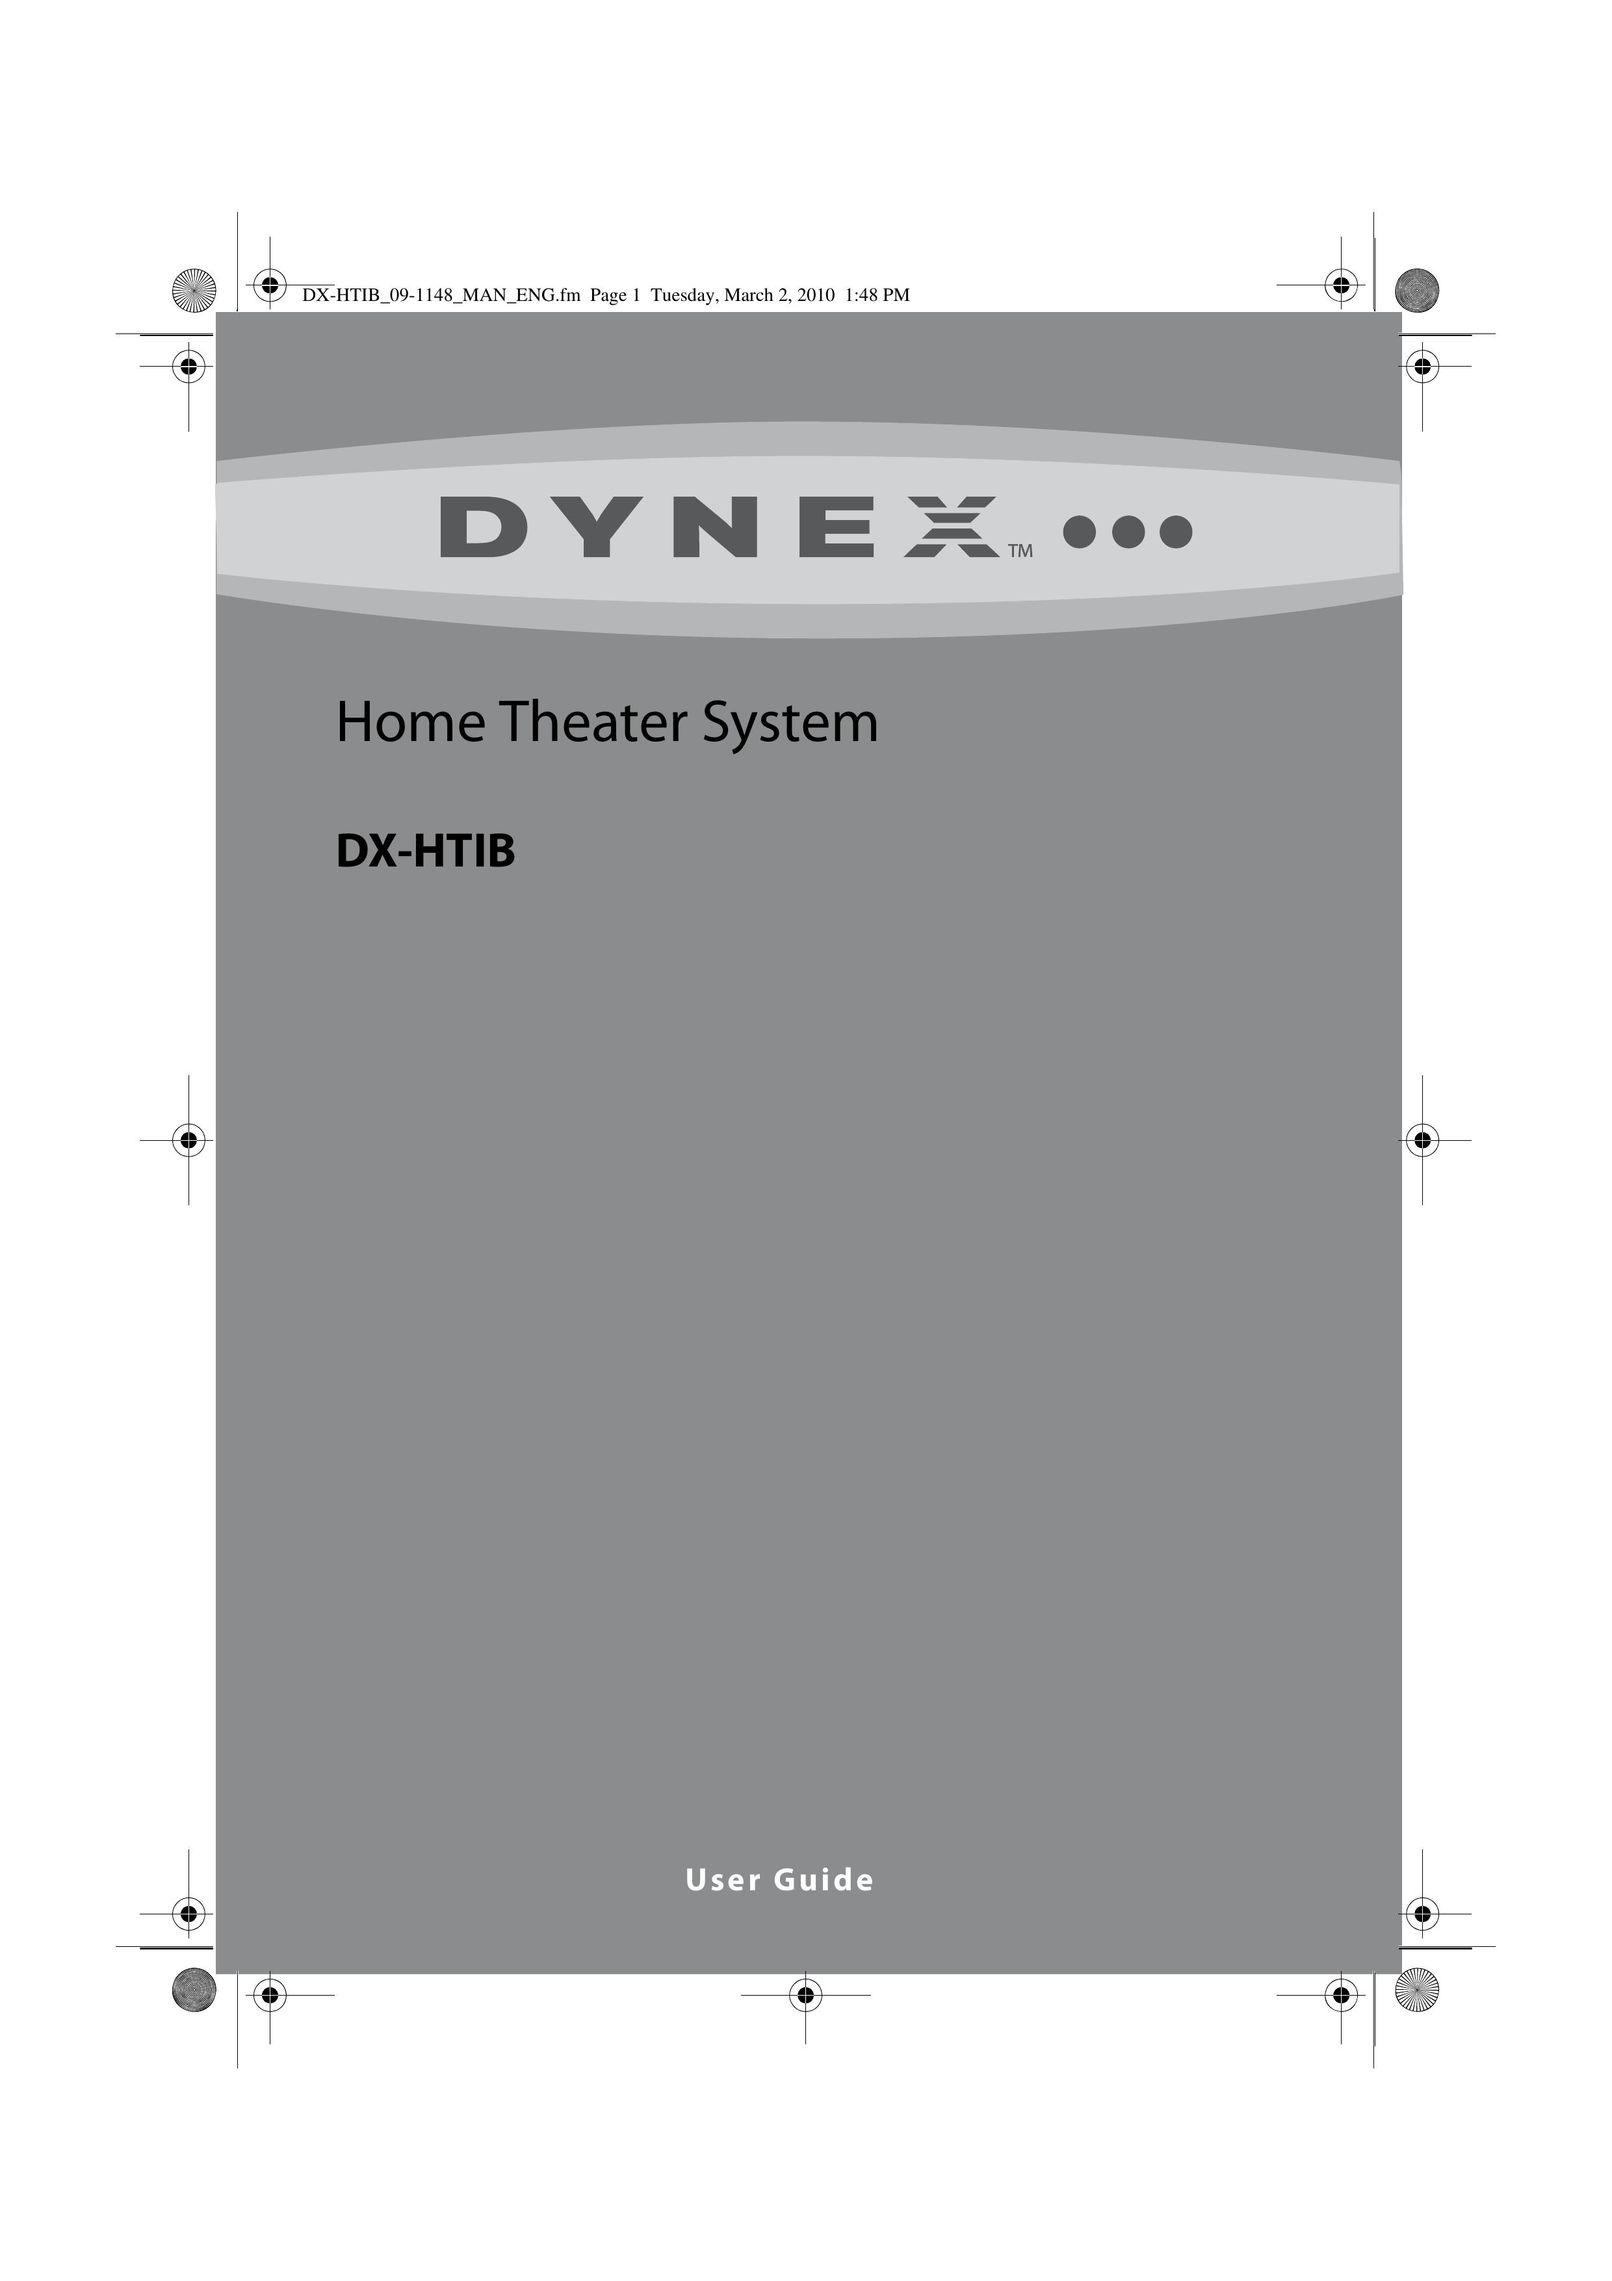 Dynex DX-HTIB Home Theater System User Manual